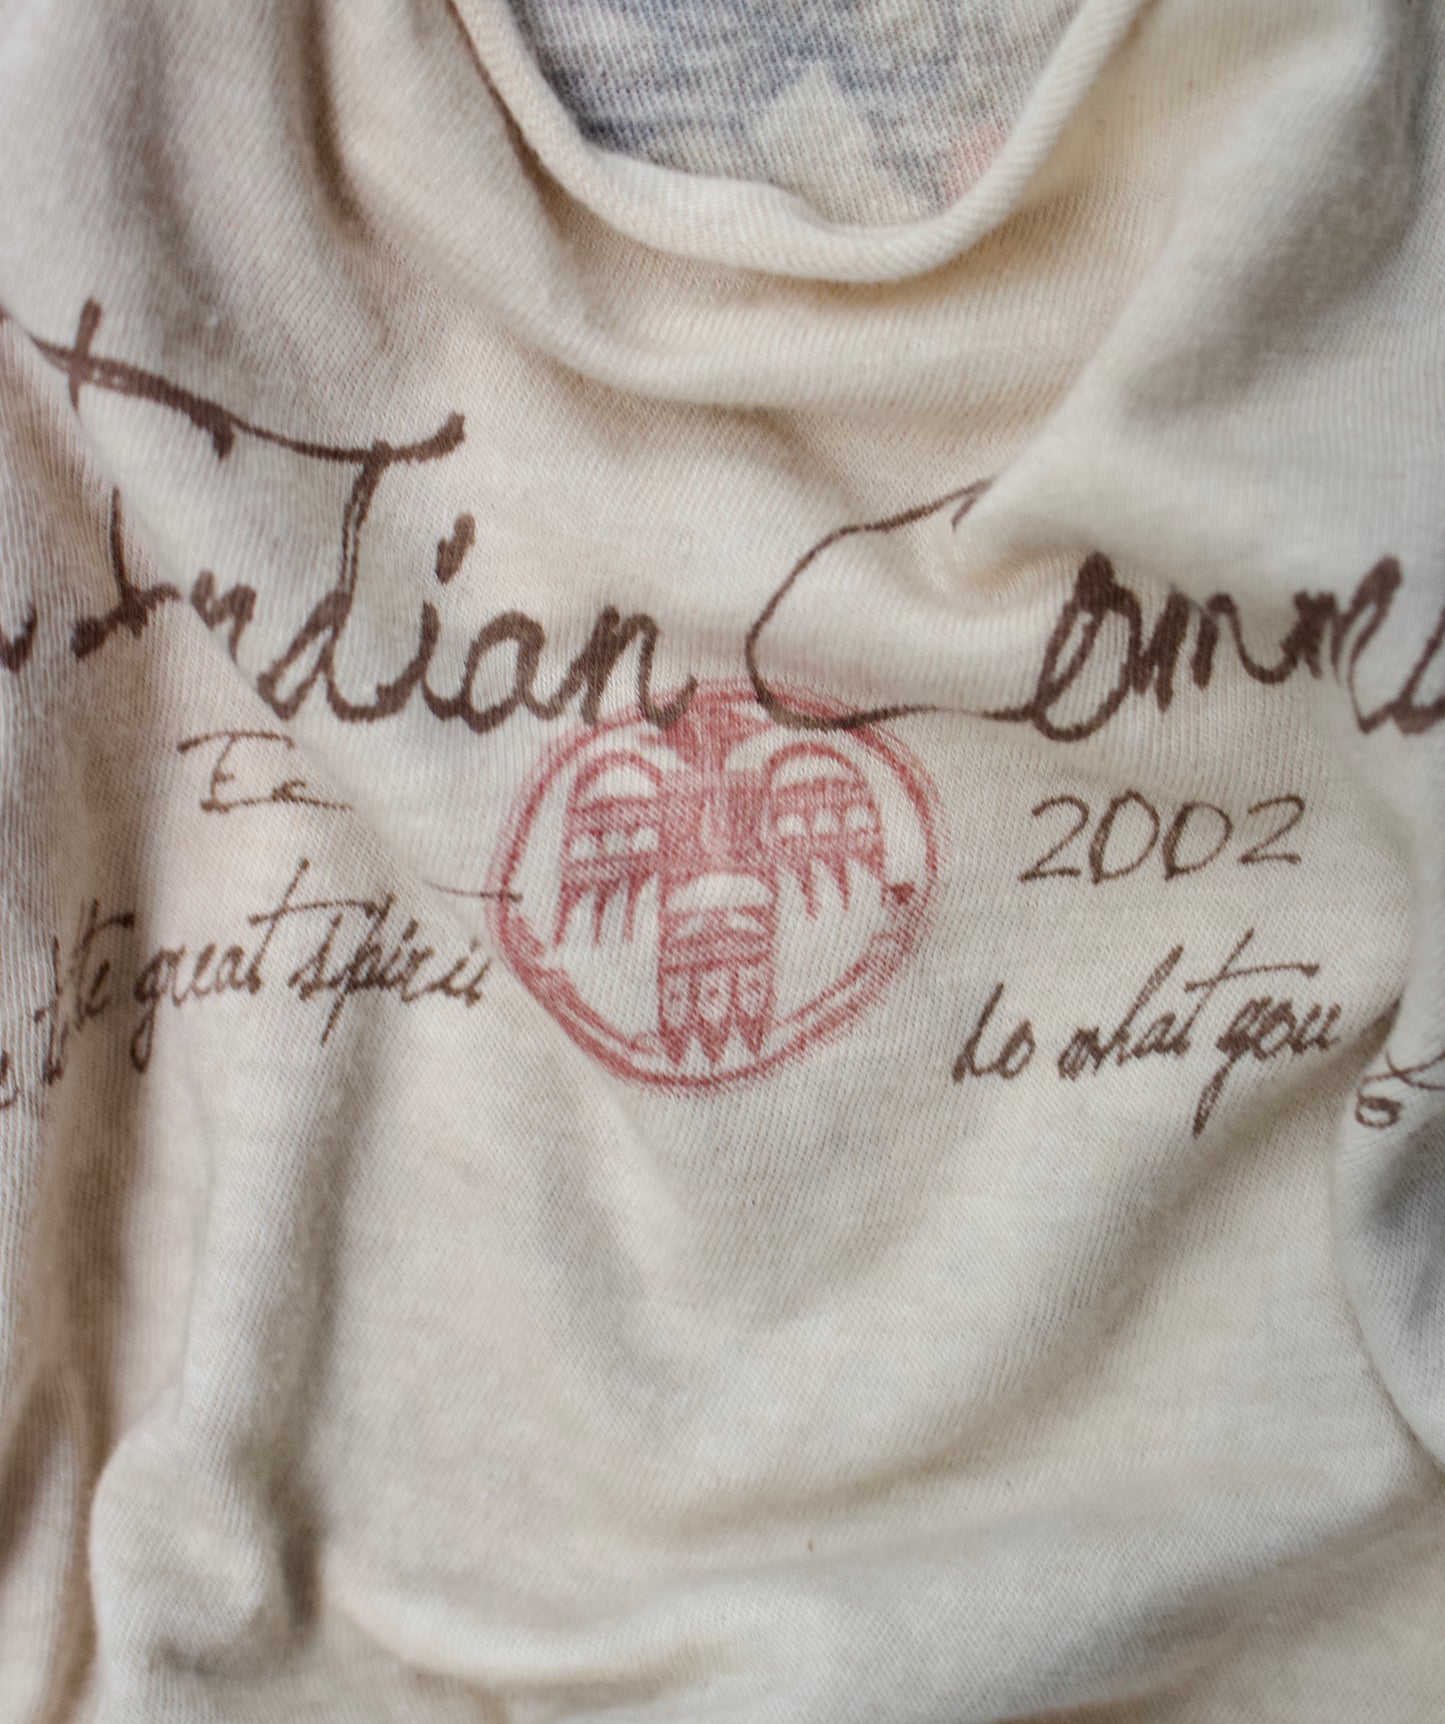 G.O.A Early 00s Distressed “Indian Commandment” Rusty Feather T-shirt